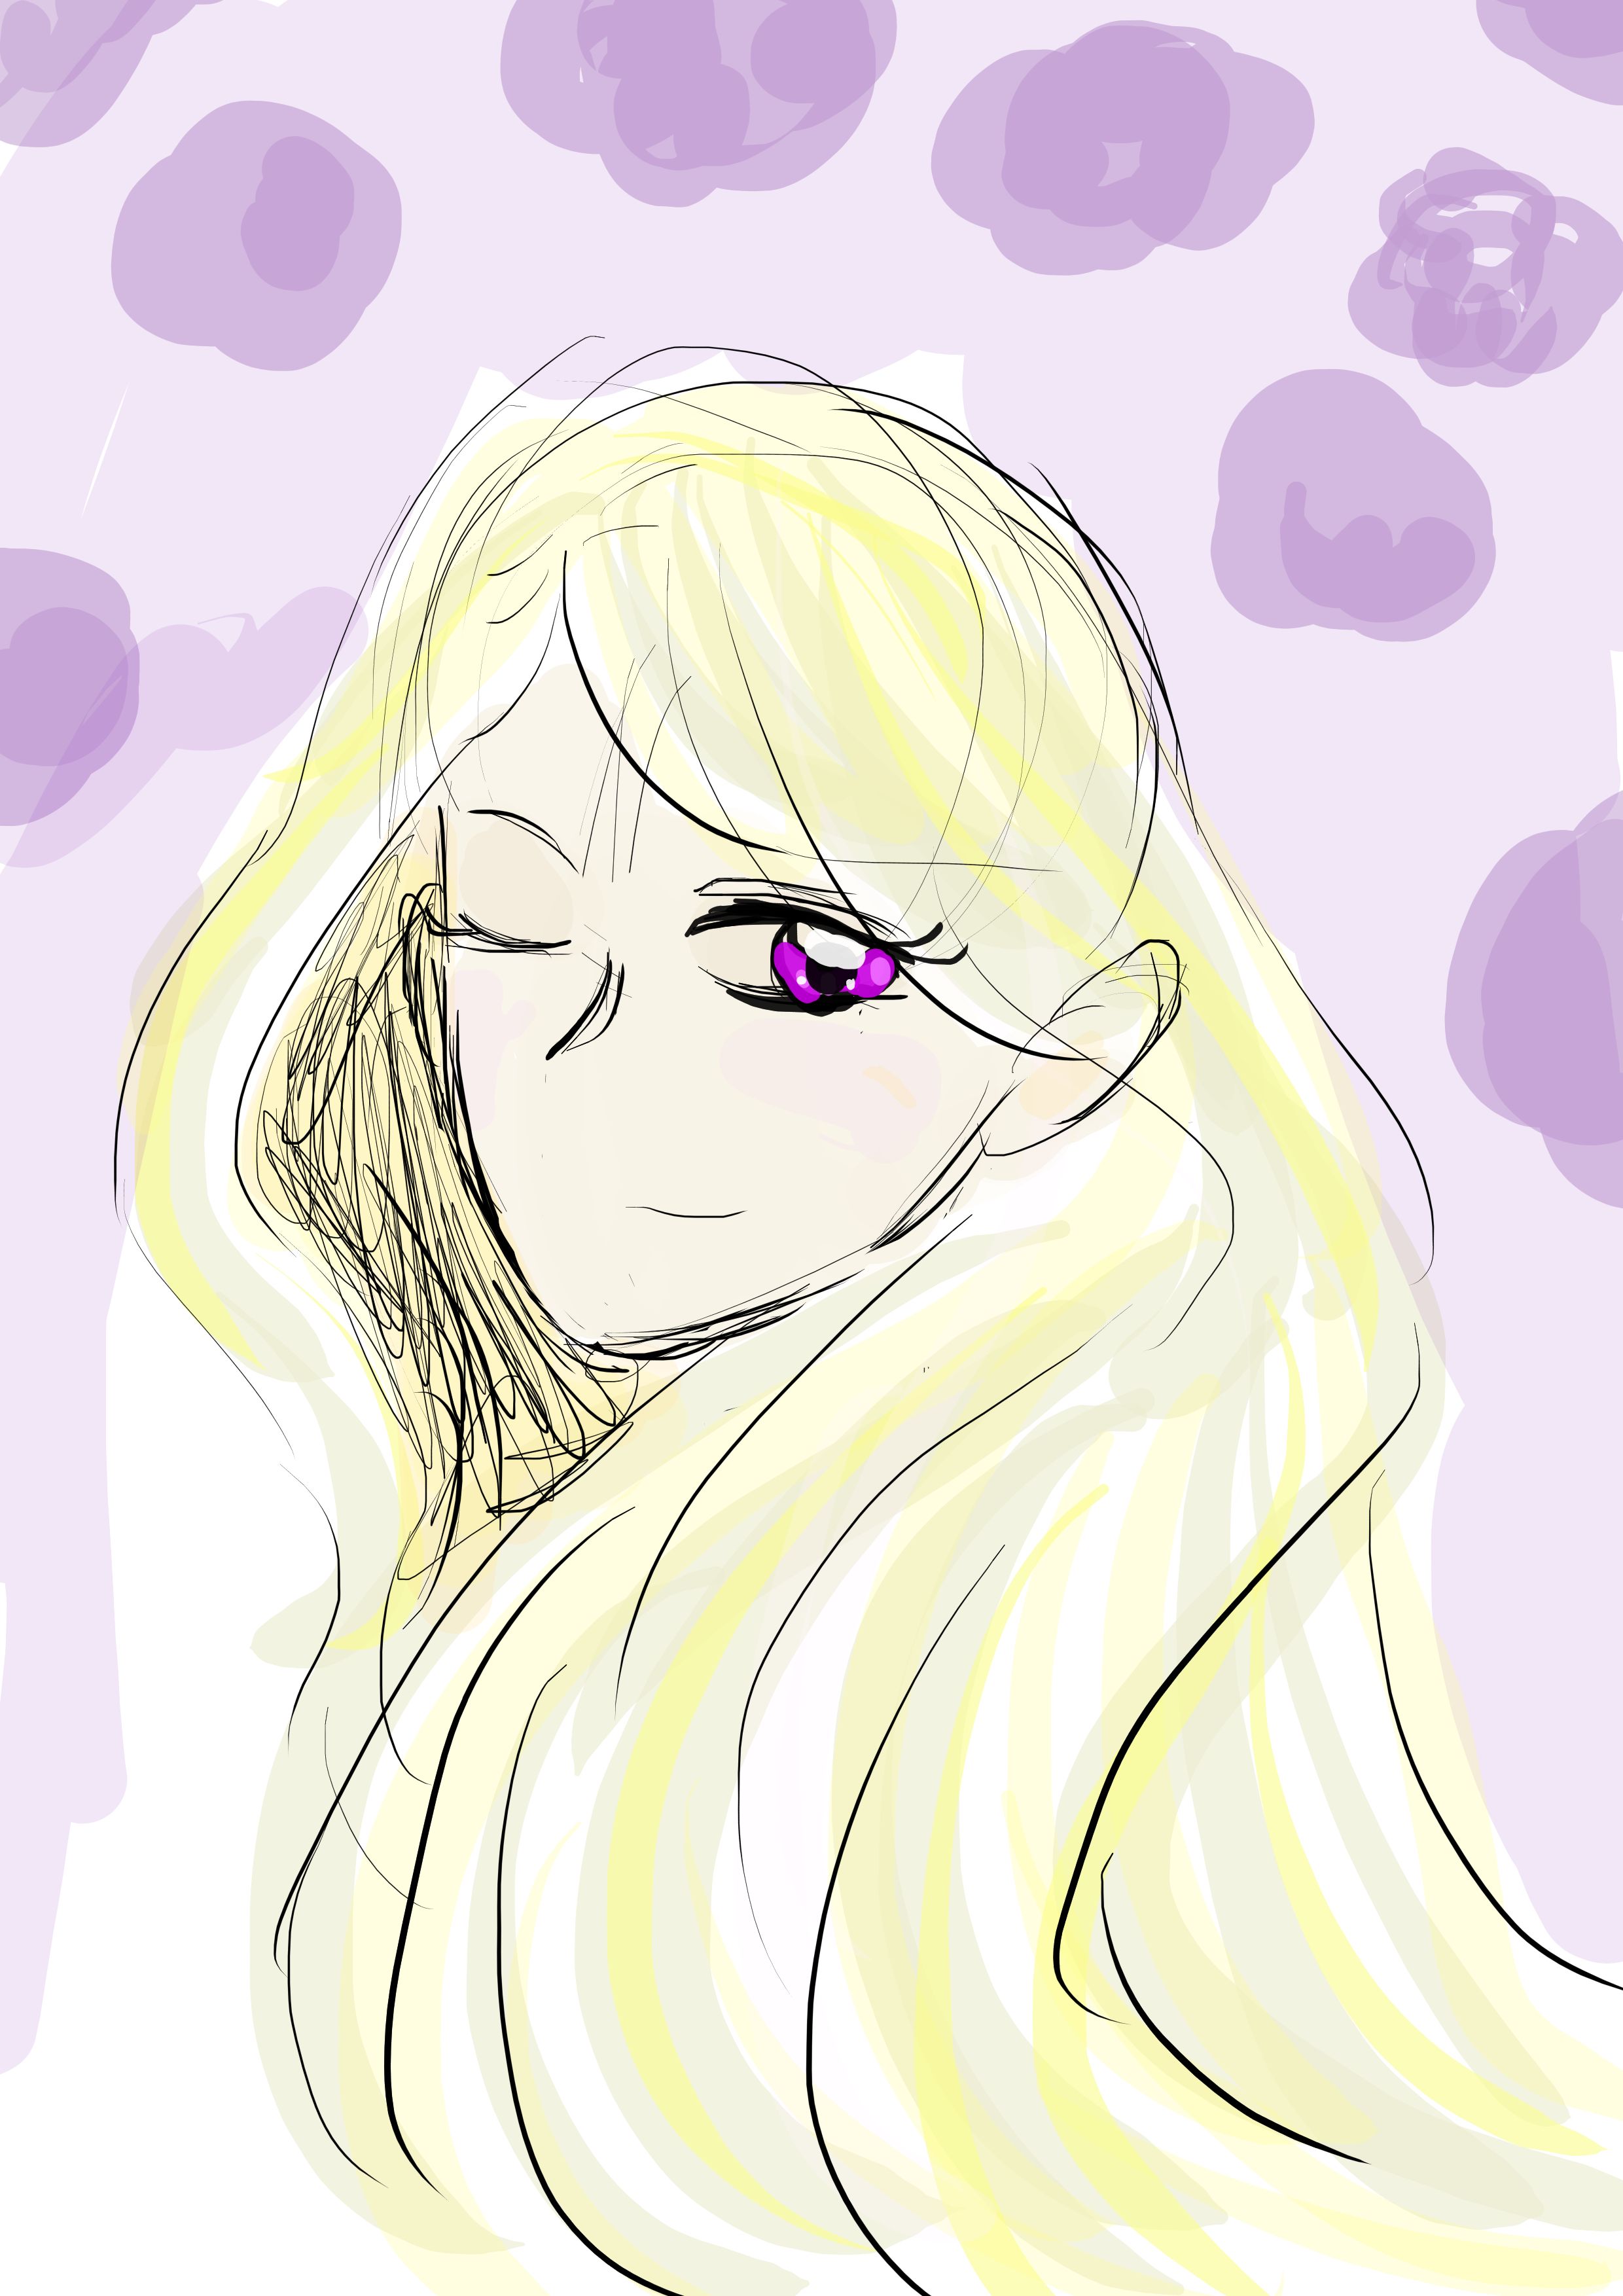 cartoon drawing of a women with blond hair who is smiling at the camera. She also has a purple floral background.